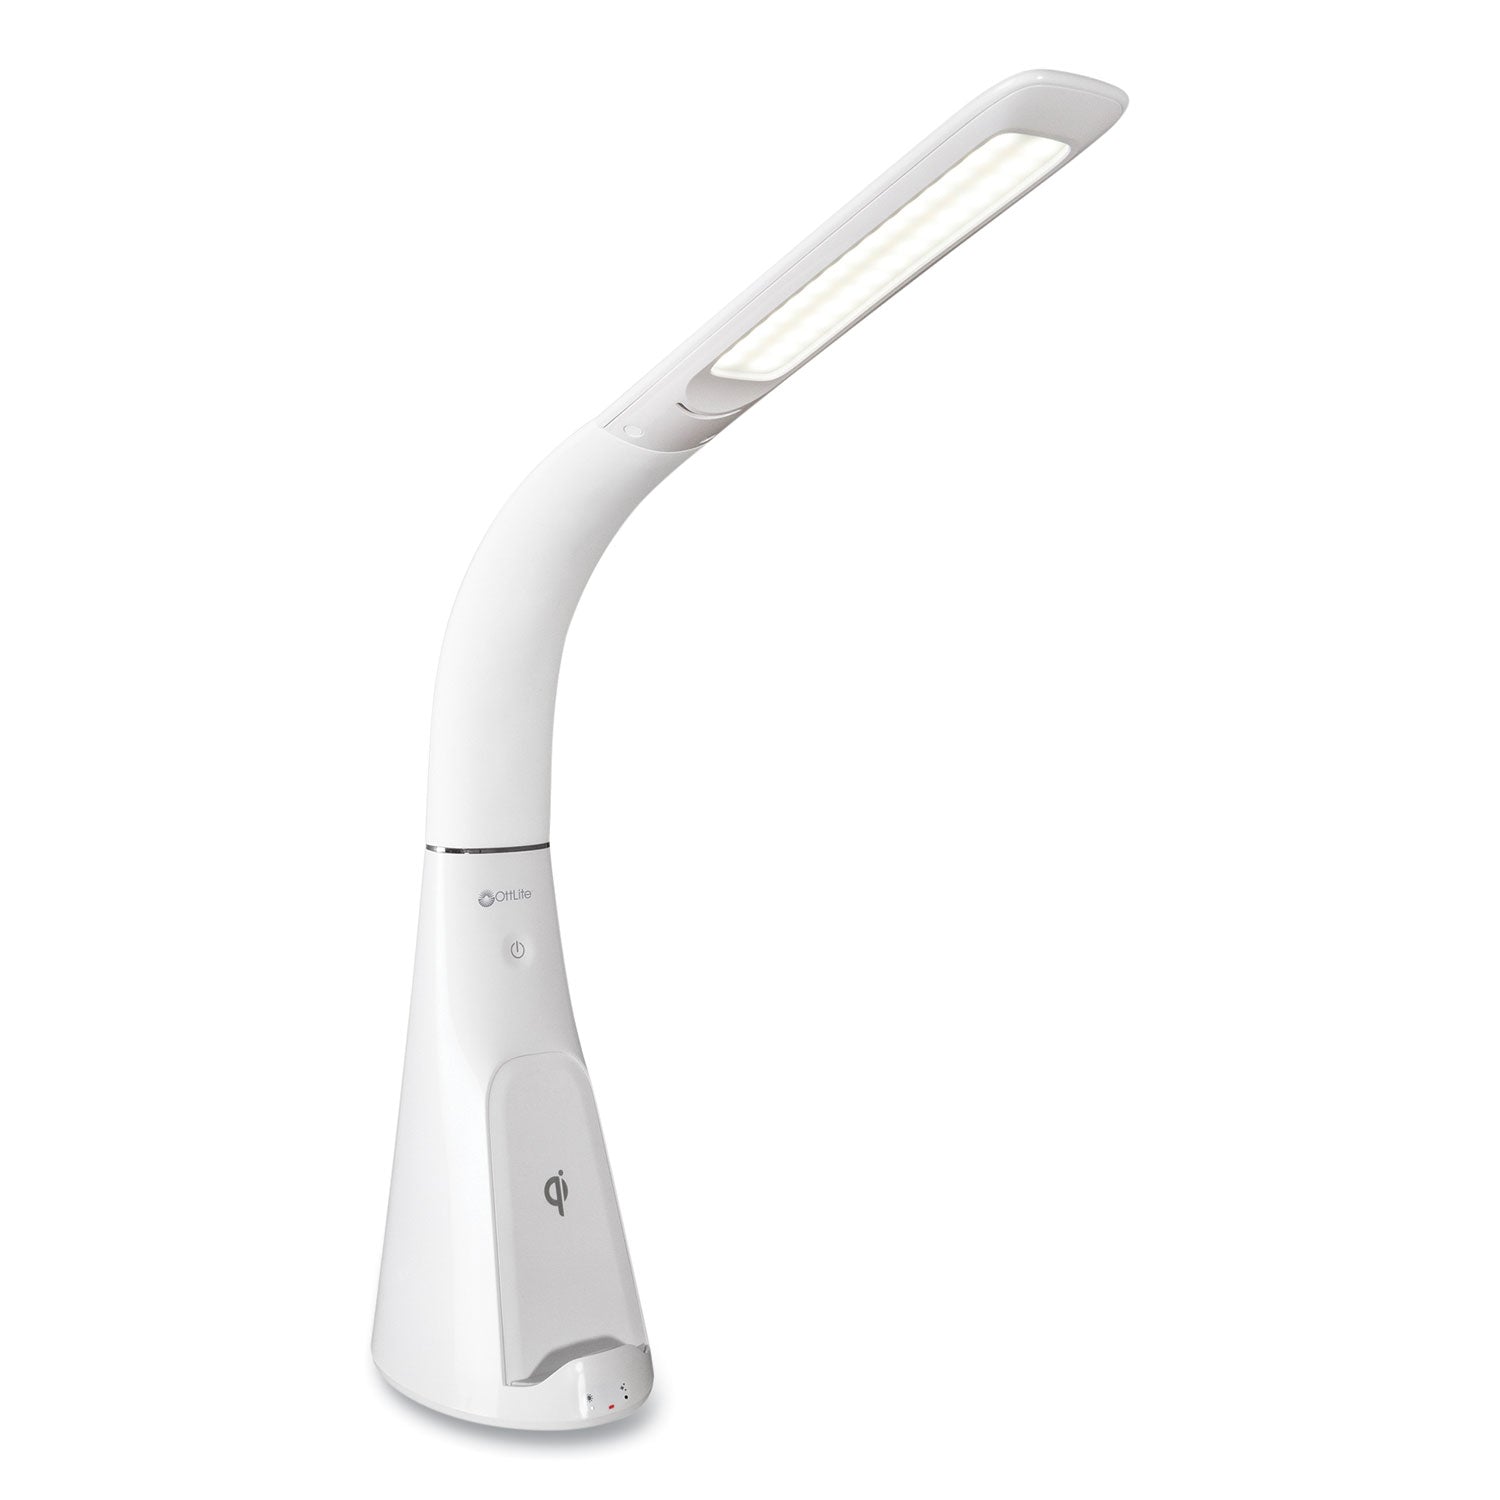 Wellness Series Sanitizing Purify LED Desk Lamp with Wireless Charging, 26" High, White, Ships in 4-6 Business Days - 1